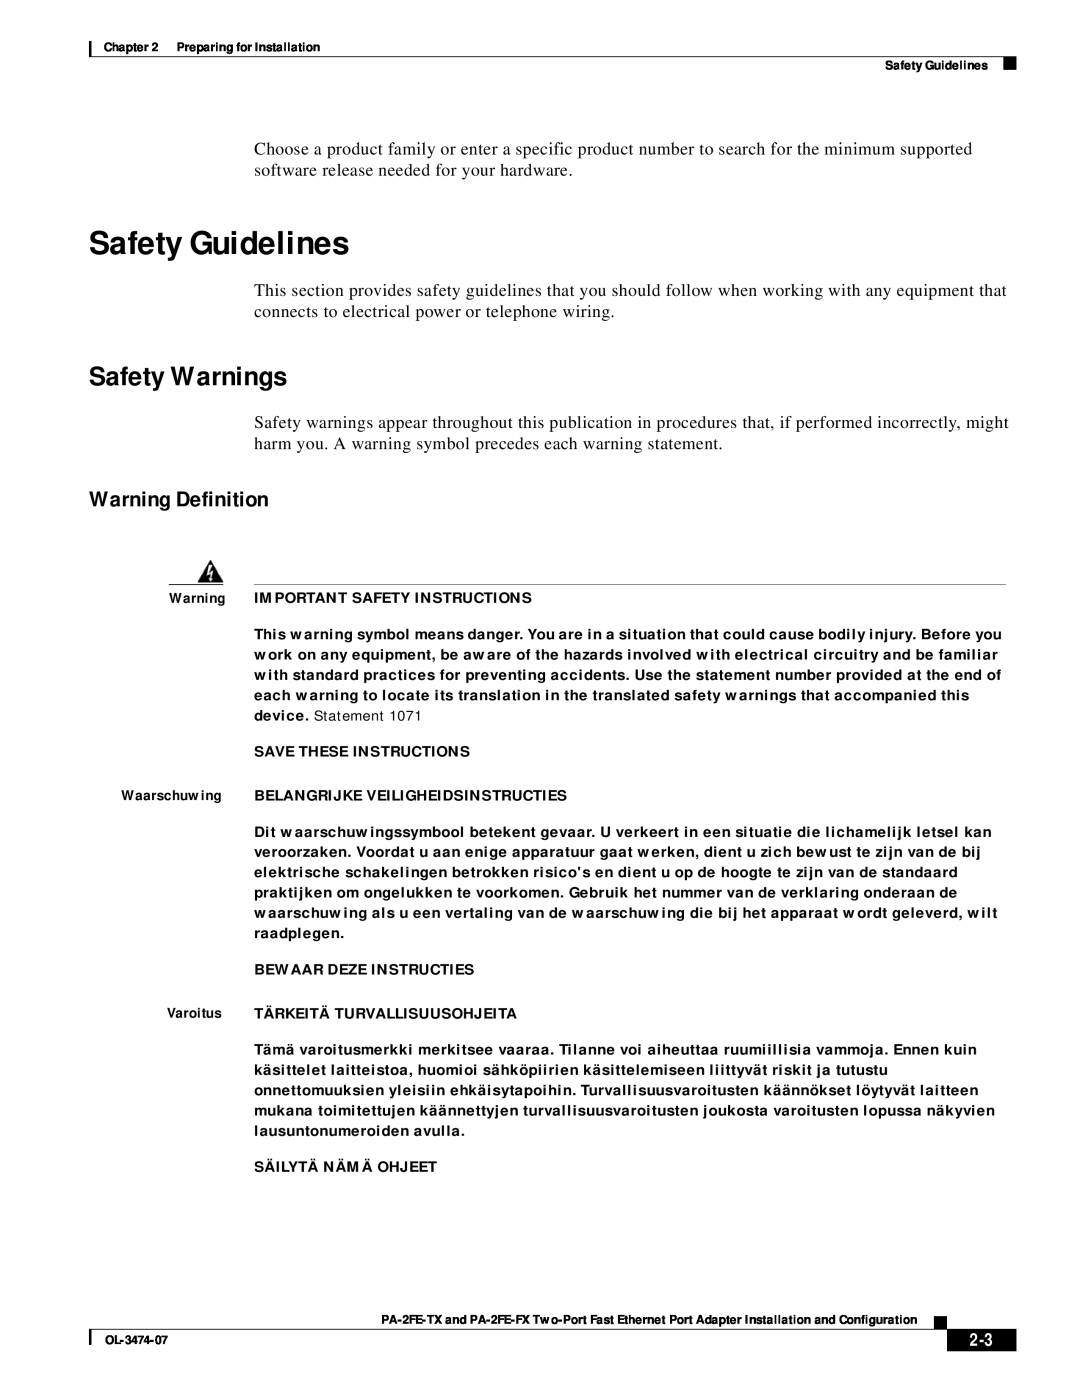 Cisco Systems PA-2FE-FX, PA-2FE-TX manual Safety Guidelines, Safety Warnings, Warning Definition 